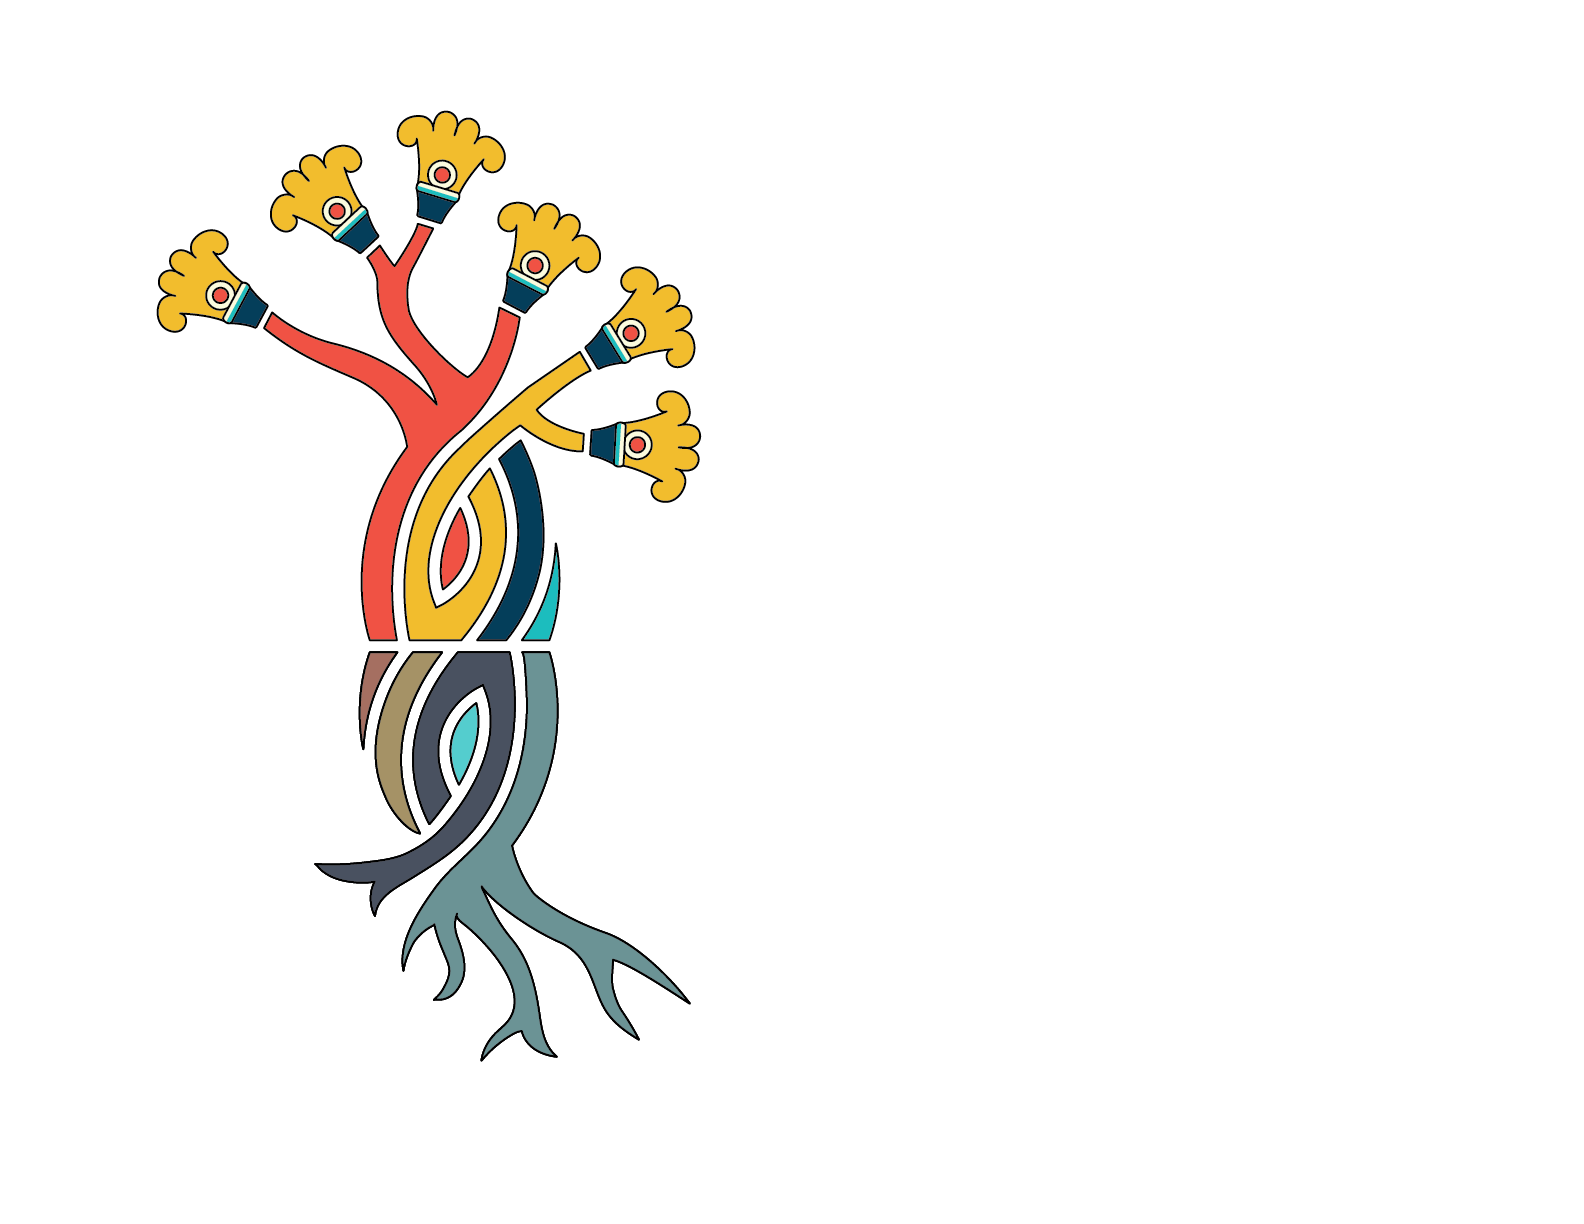 Indigenous Roots